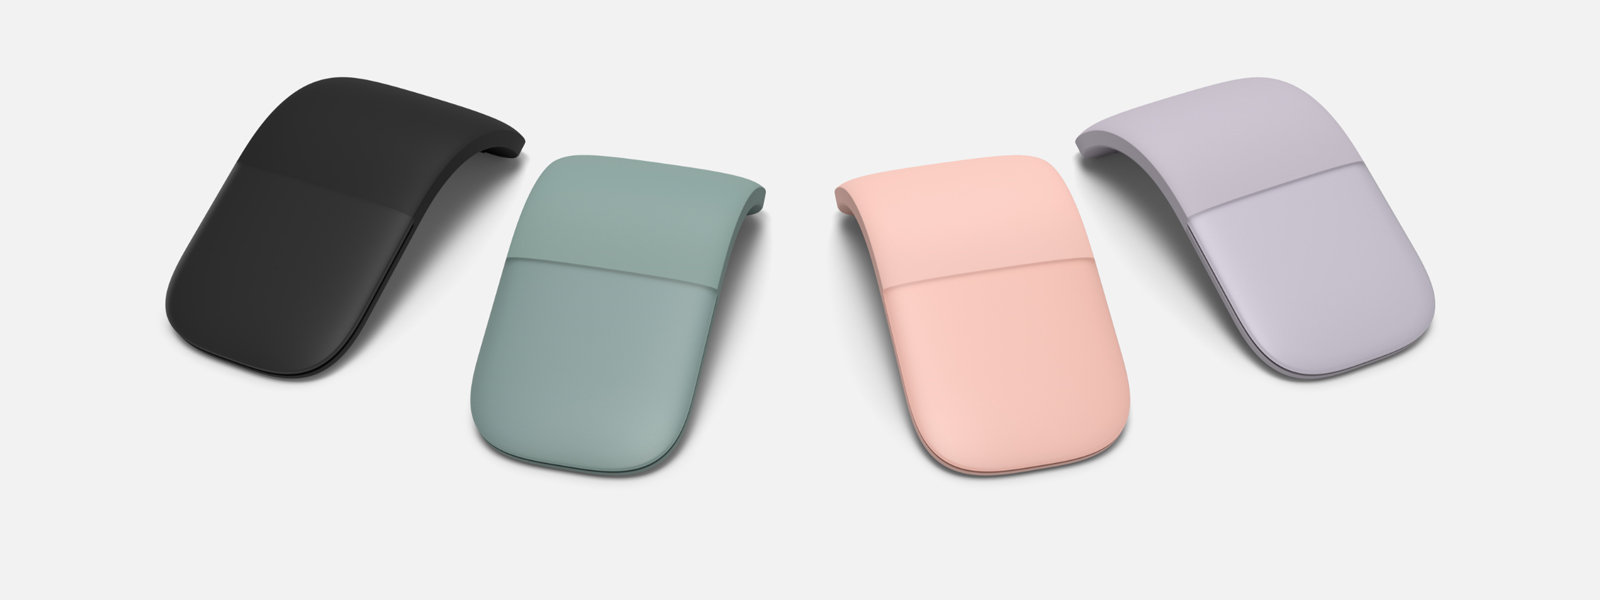 Microsoft Arc Mouse in various colors.